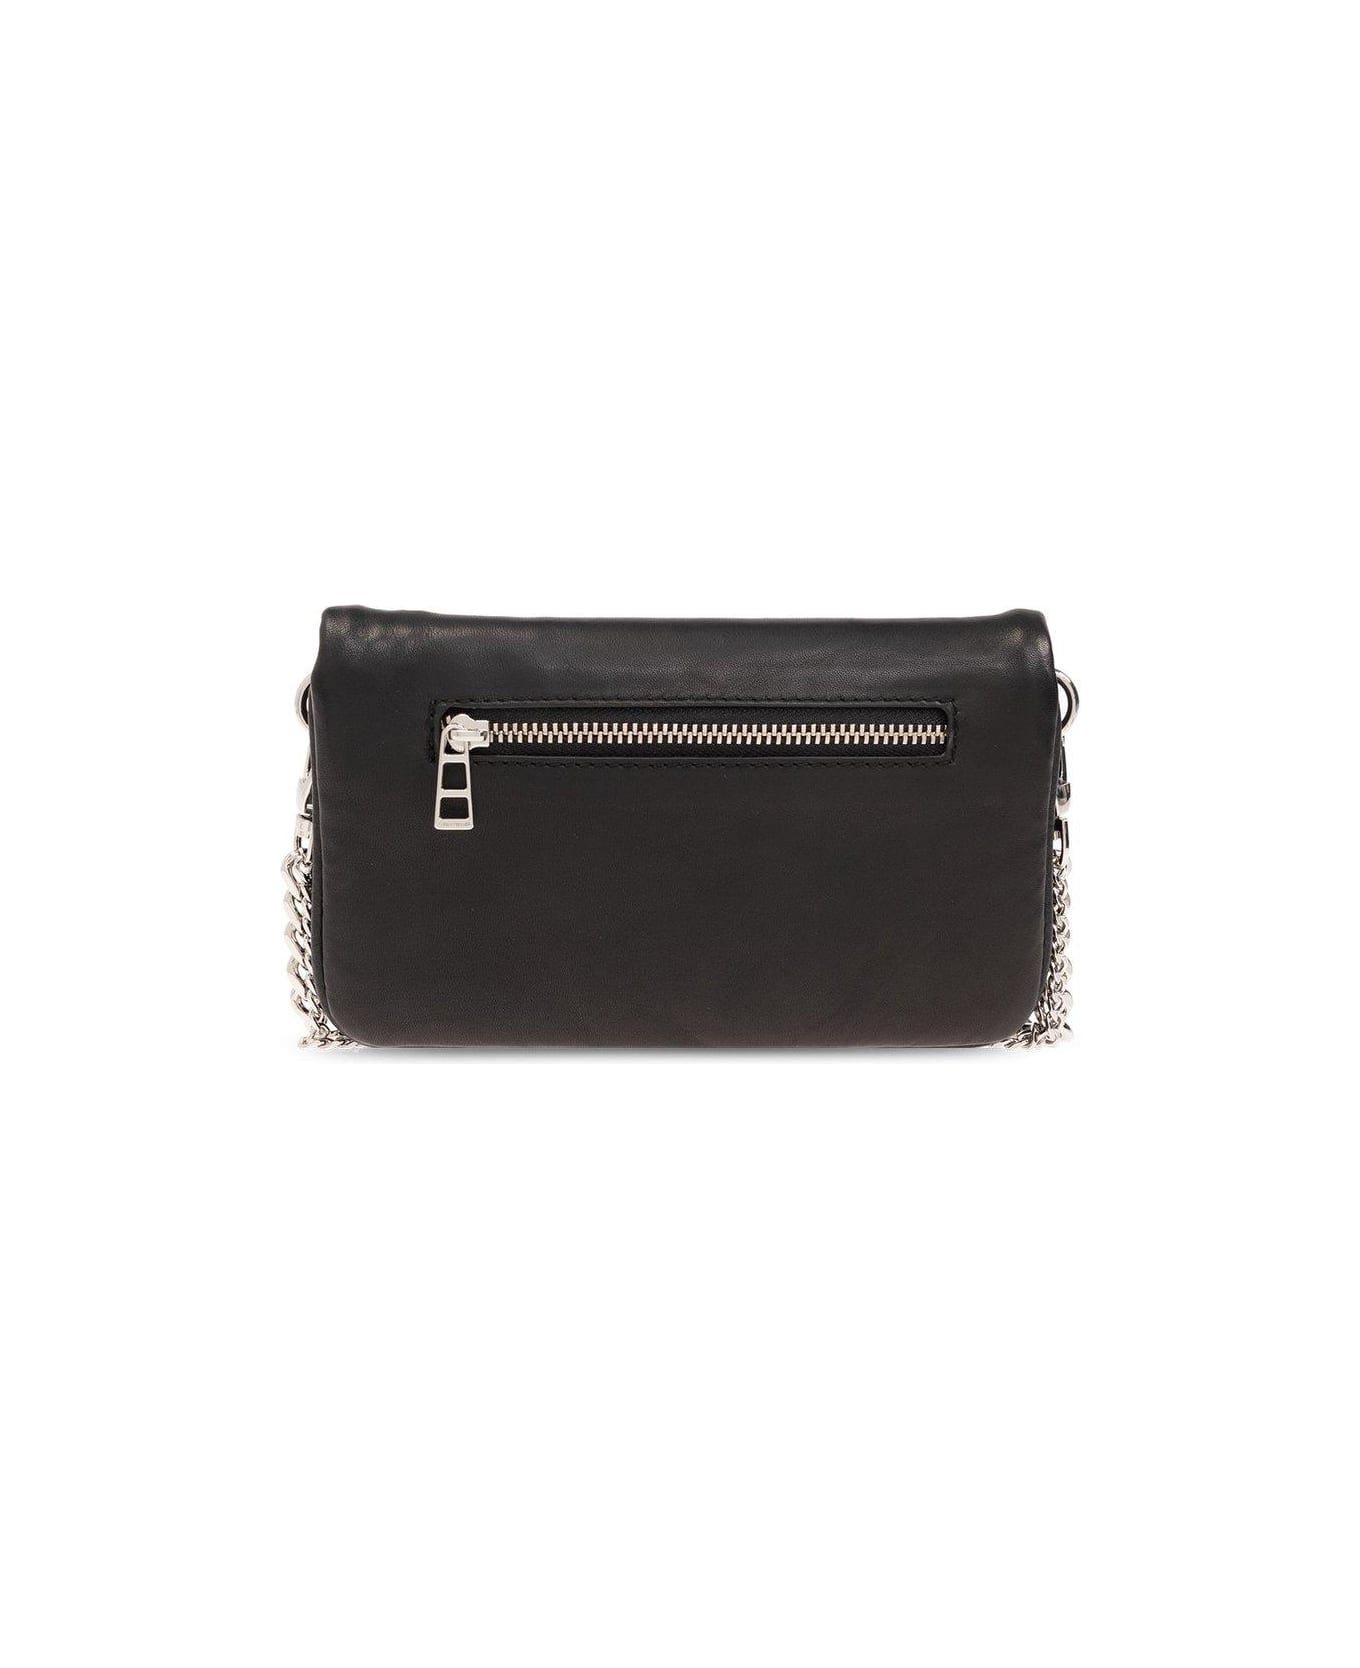 Zadig & Voltaire Rock Nano Lucky Charms Clutch Bag - Black